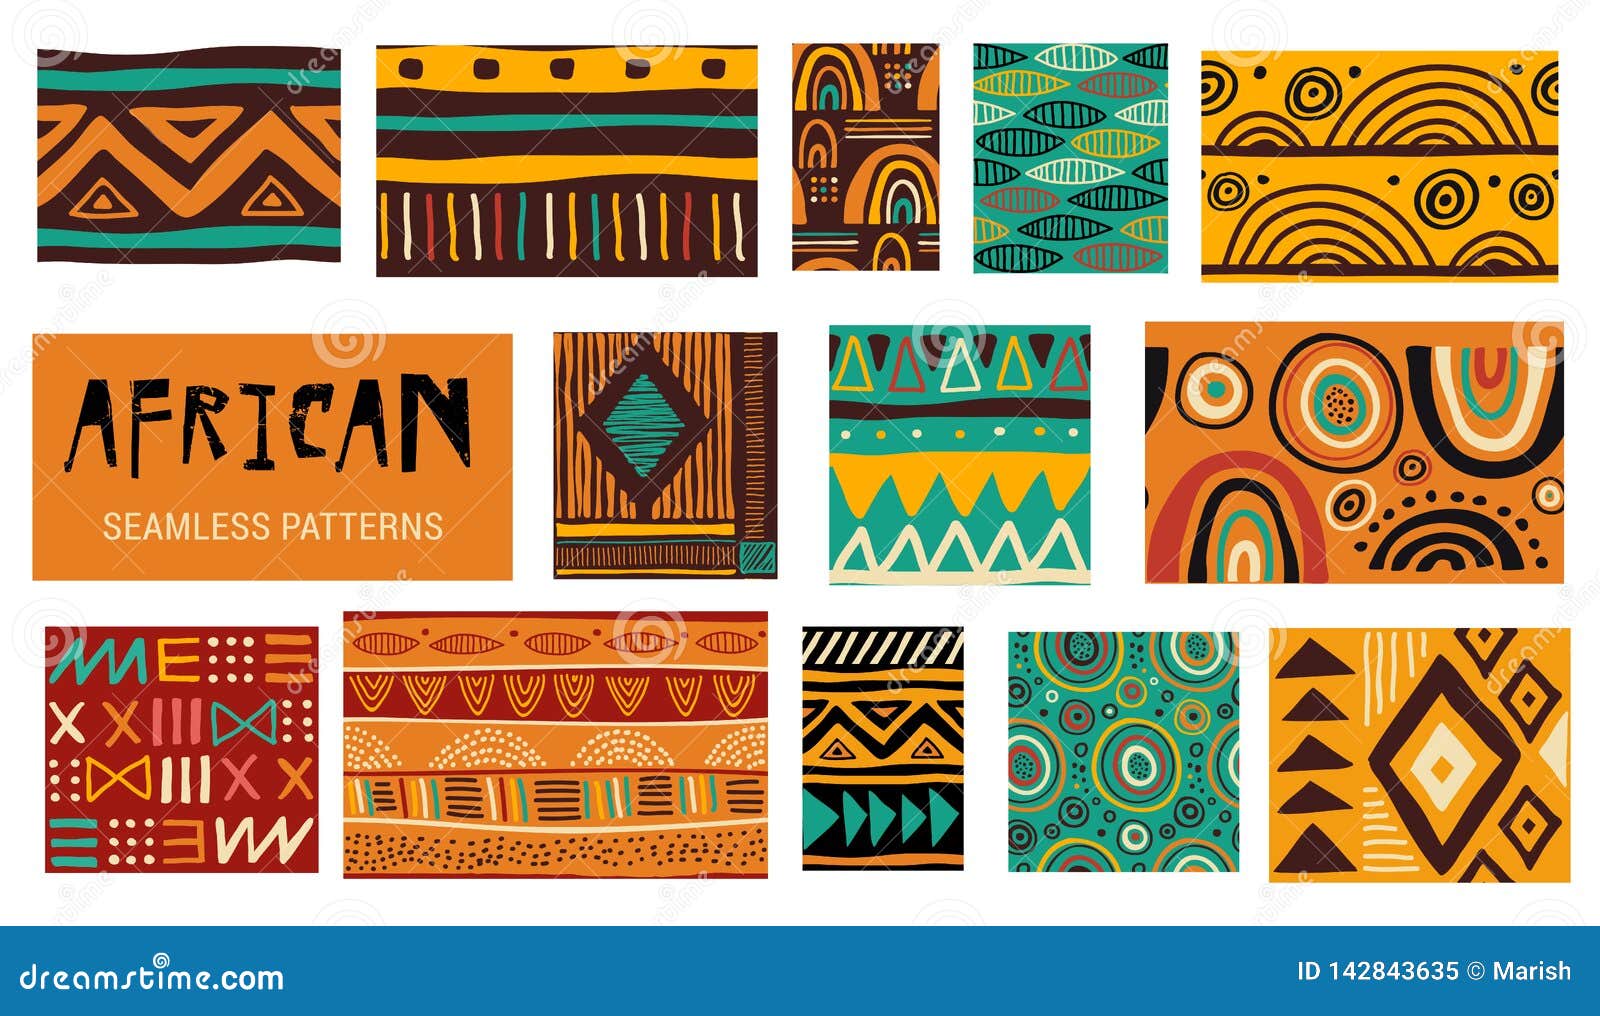 African Patterns Vector Art Stock Illustrations 5435 African